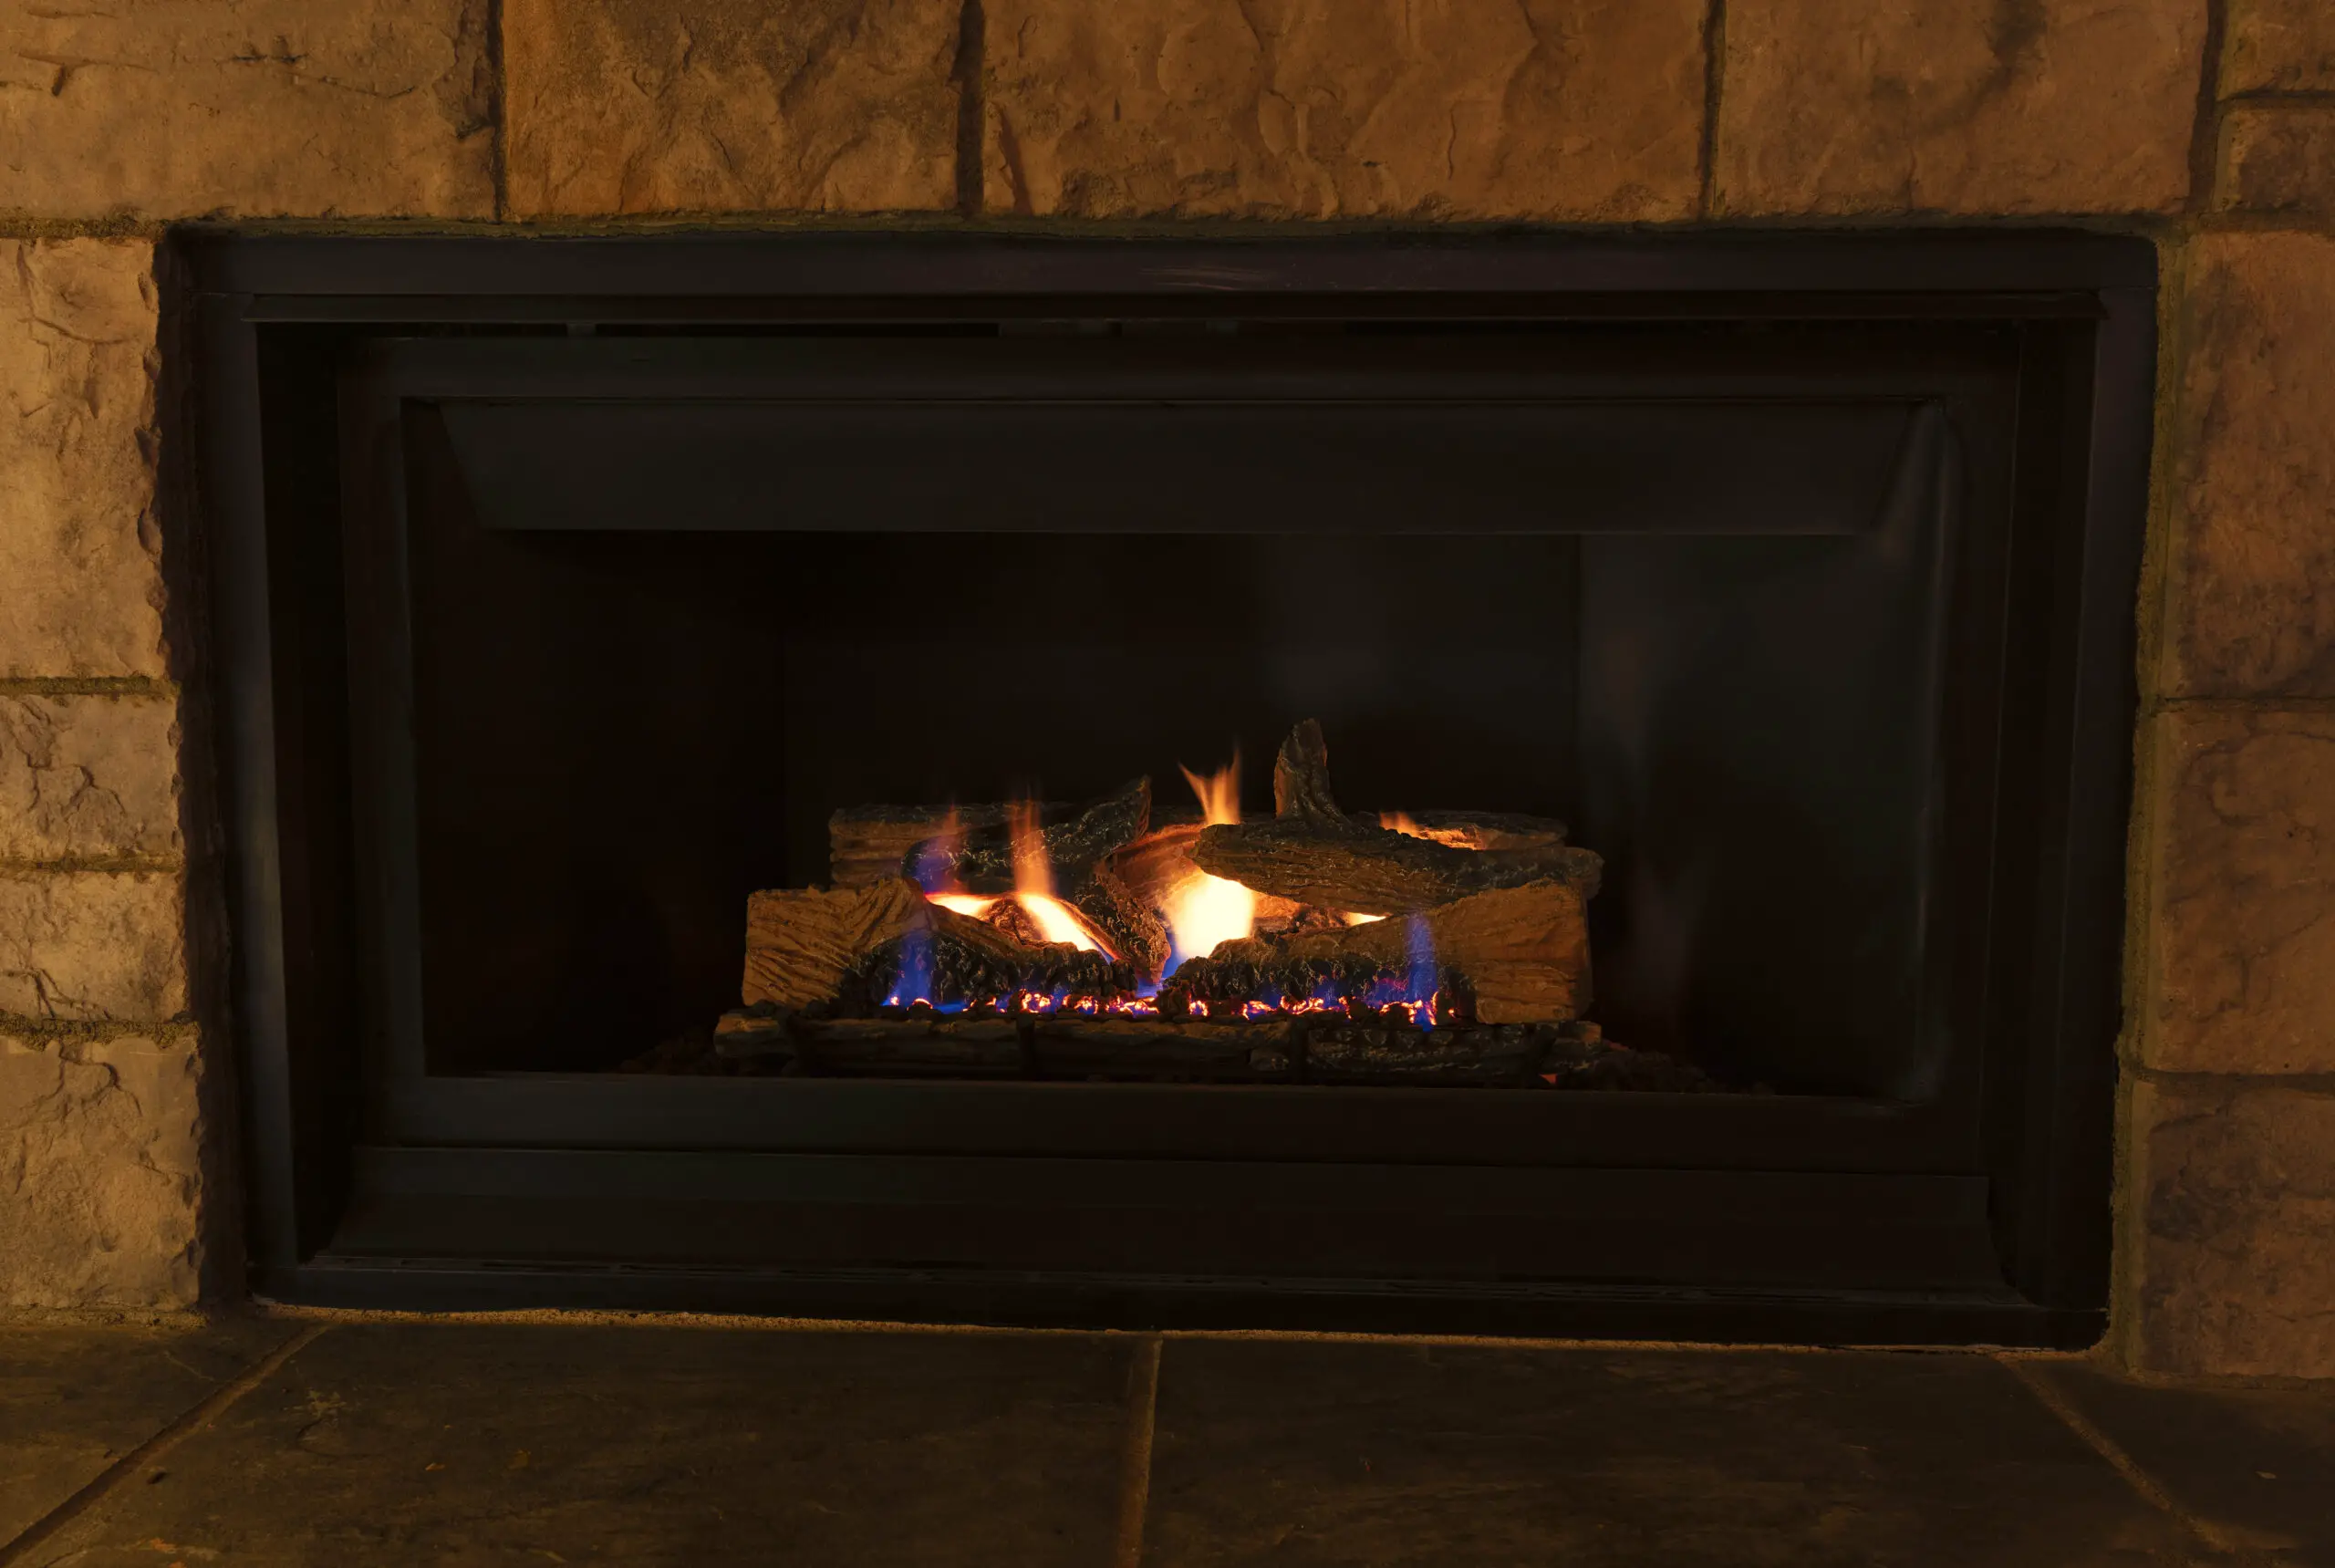 Burning natural gas fireplace during the evening at home